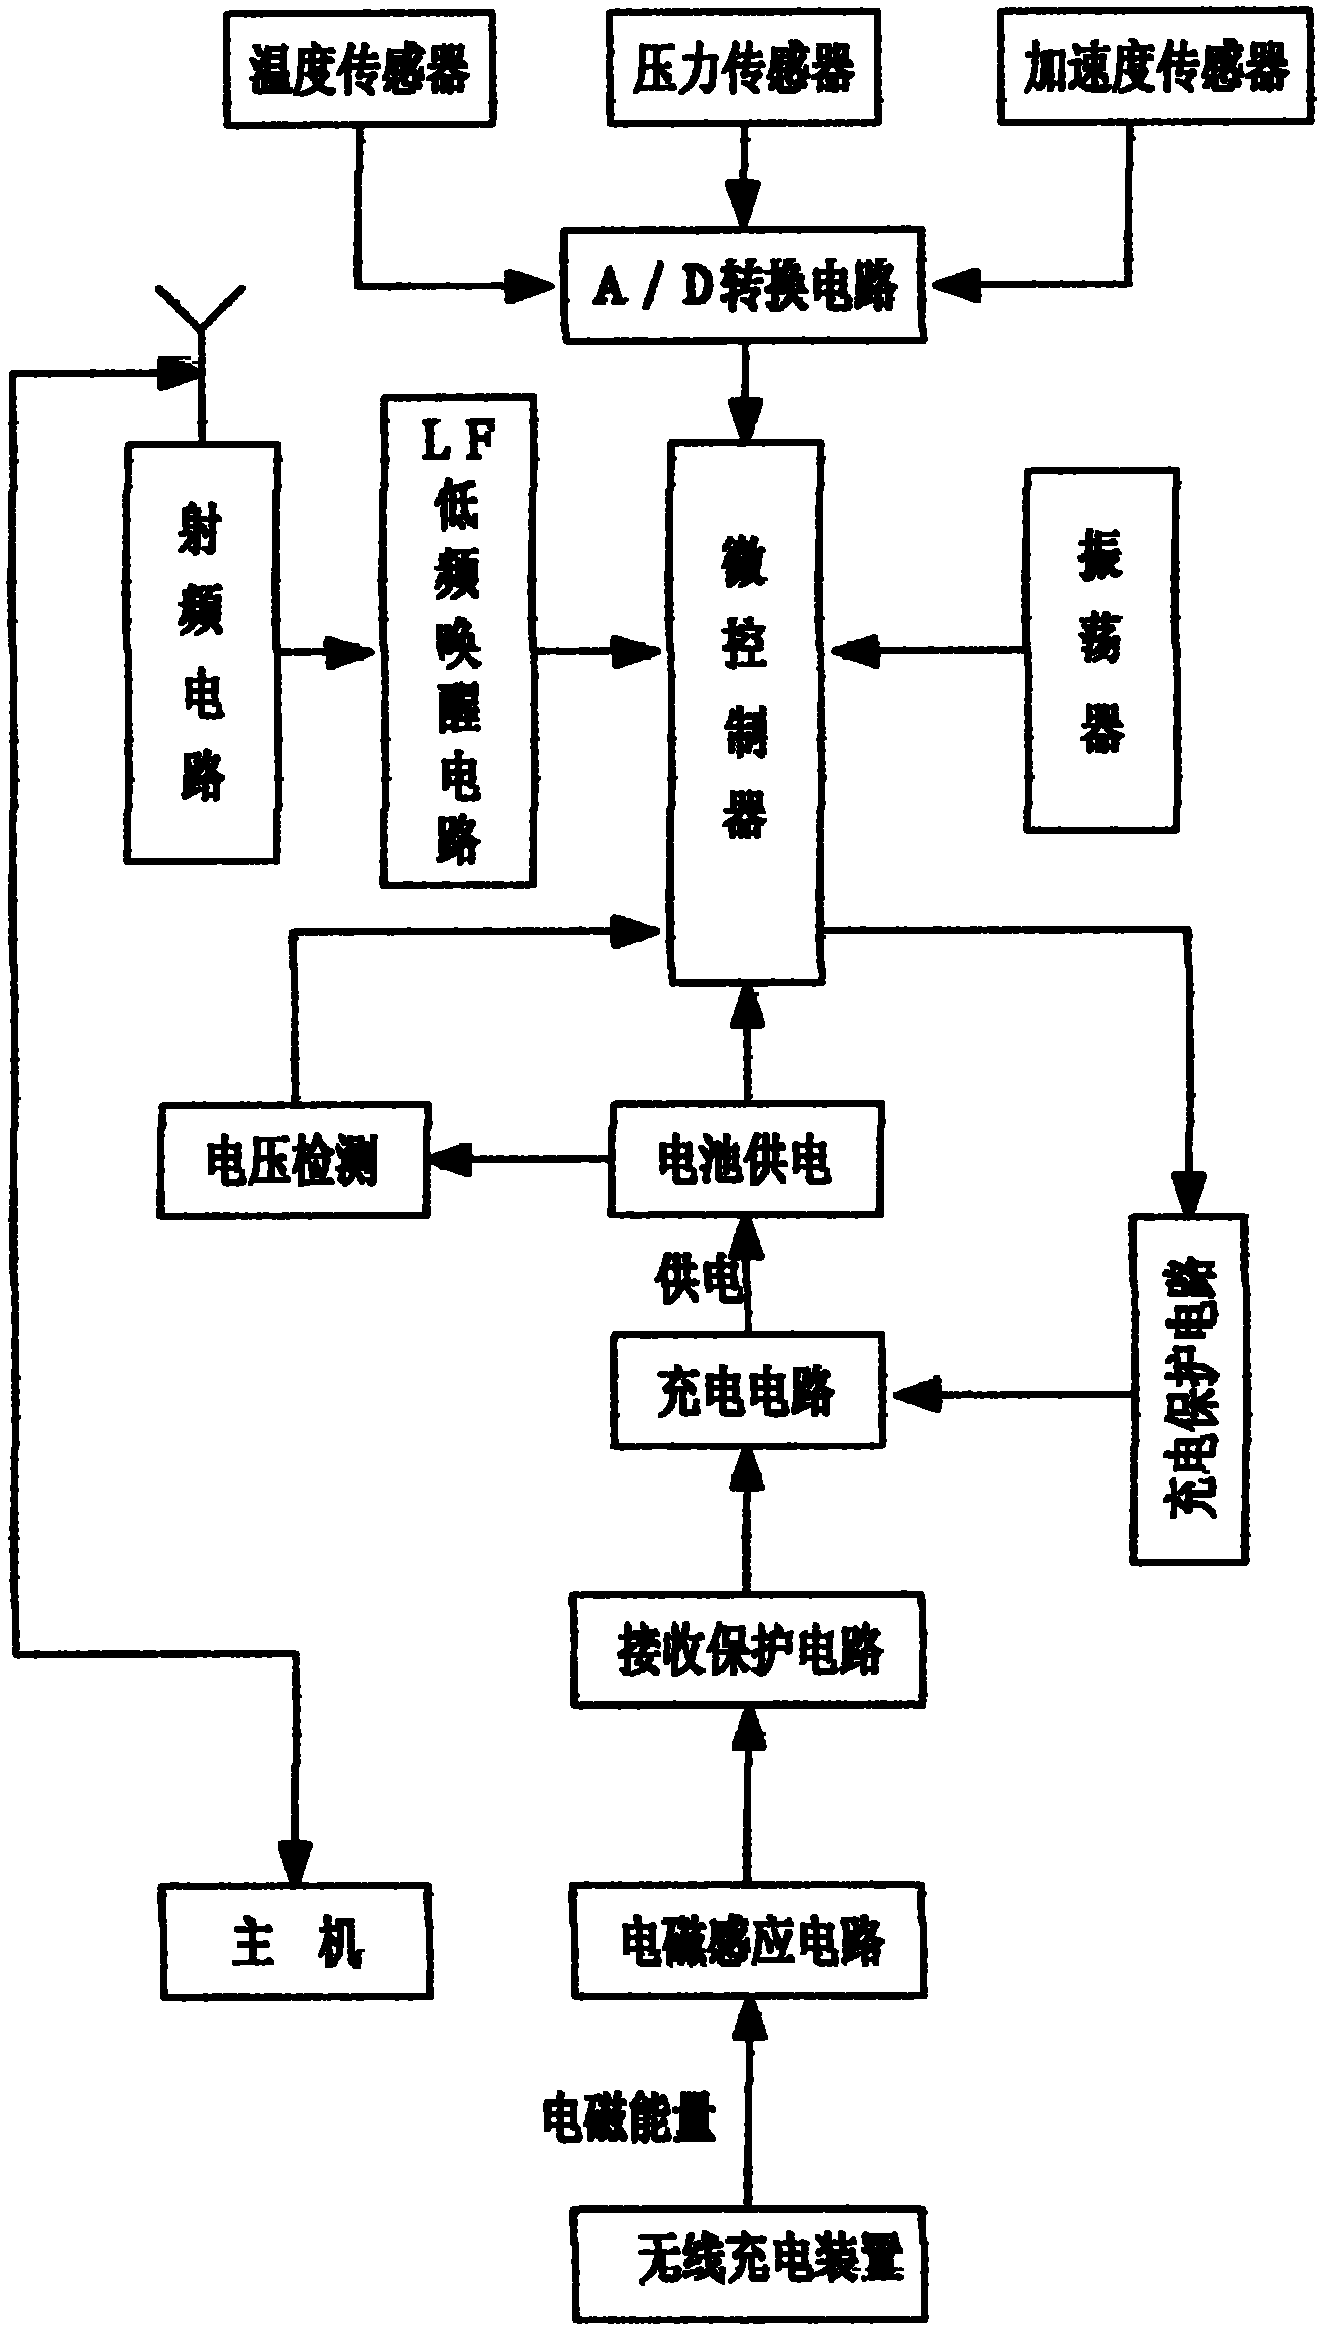 Wireless charging monitoring device for automobile tire pressure